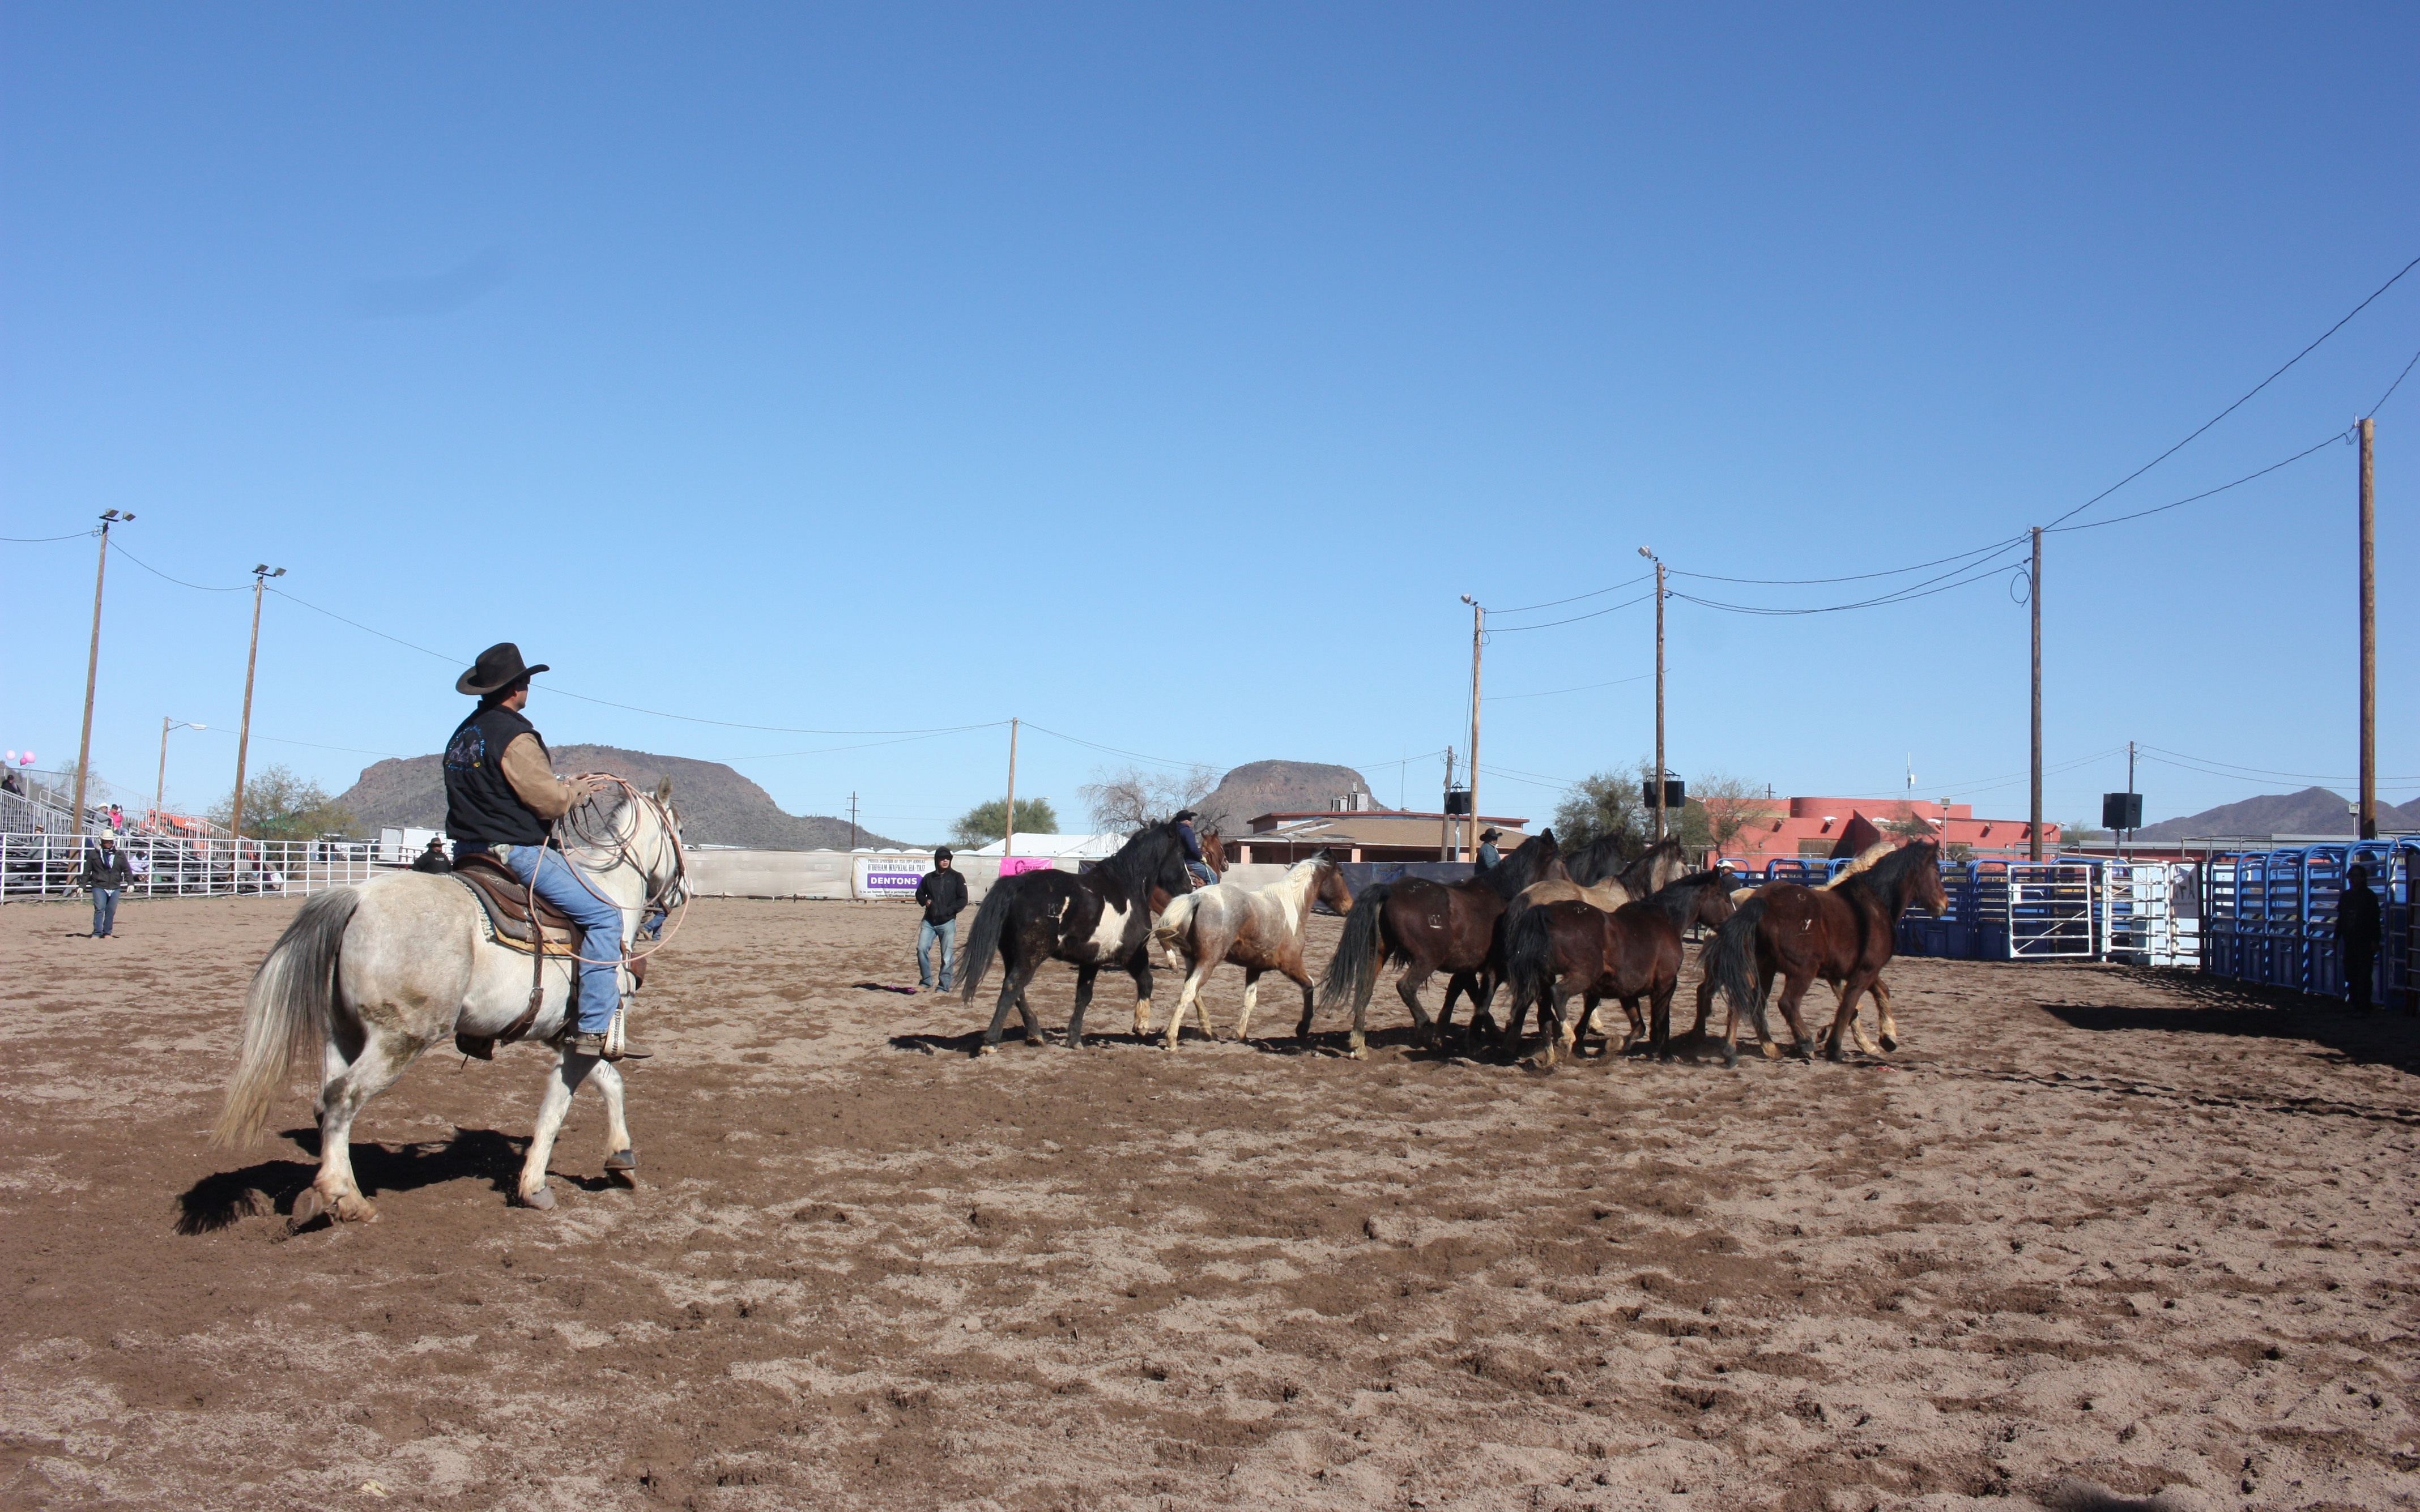 A cowboy works with horses before the start of the Wapkial Ha-tas All Indian Rodeo in Sells, Arizona. The rodeo attracts fans and tribal members from both the U.S. and Mexico. (Photo by Sarah Jarvis/Cronkite News) 